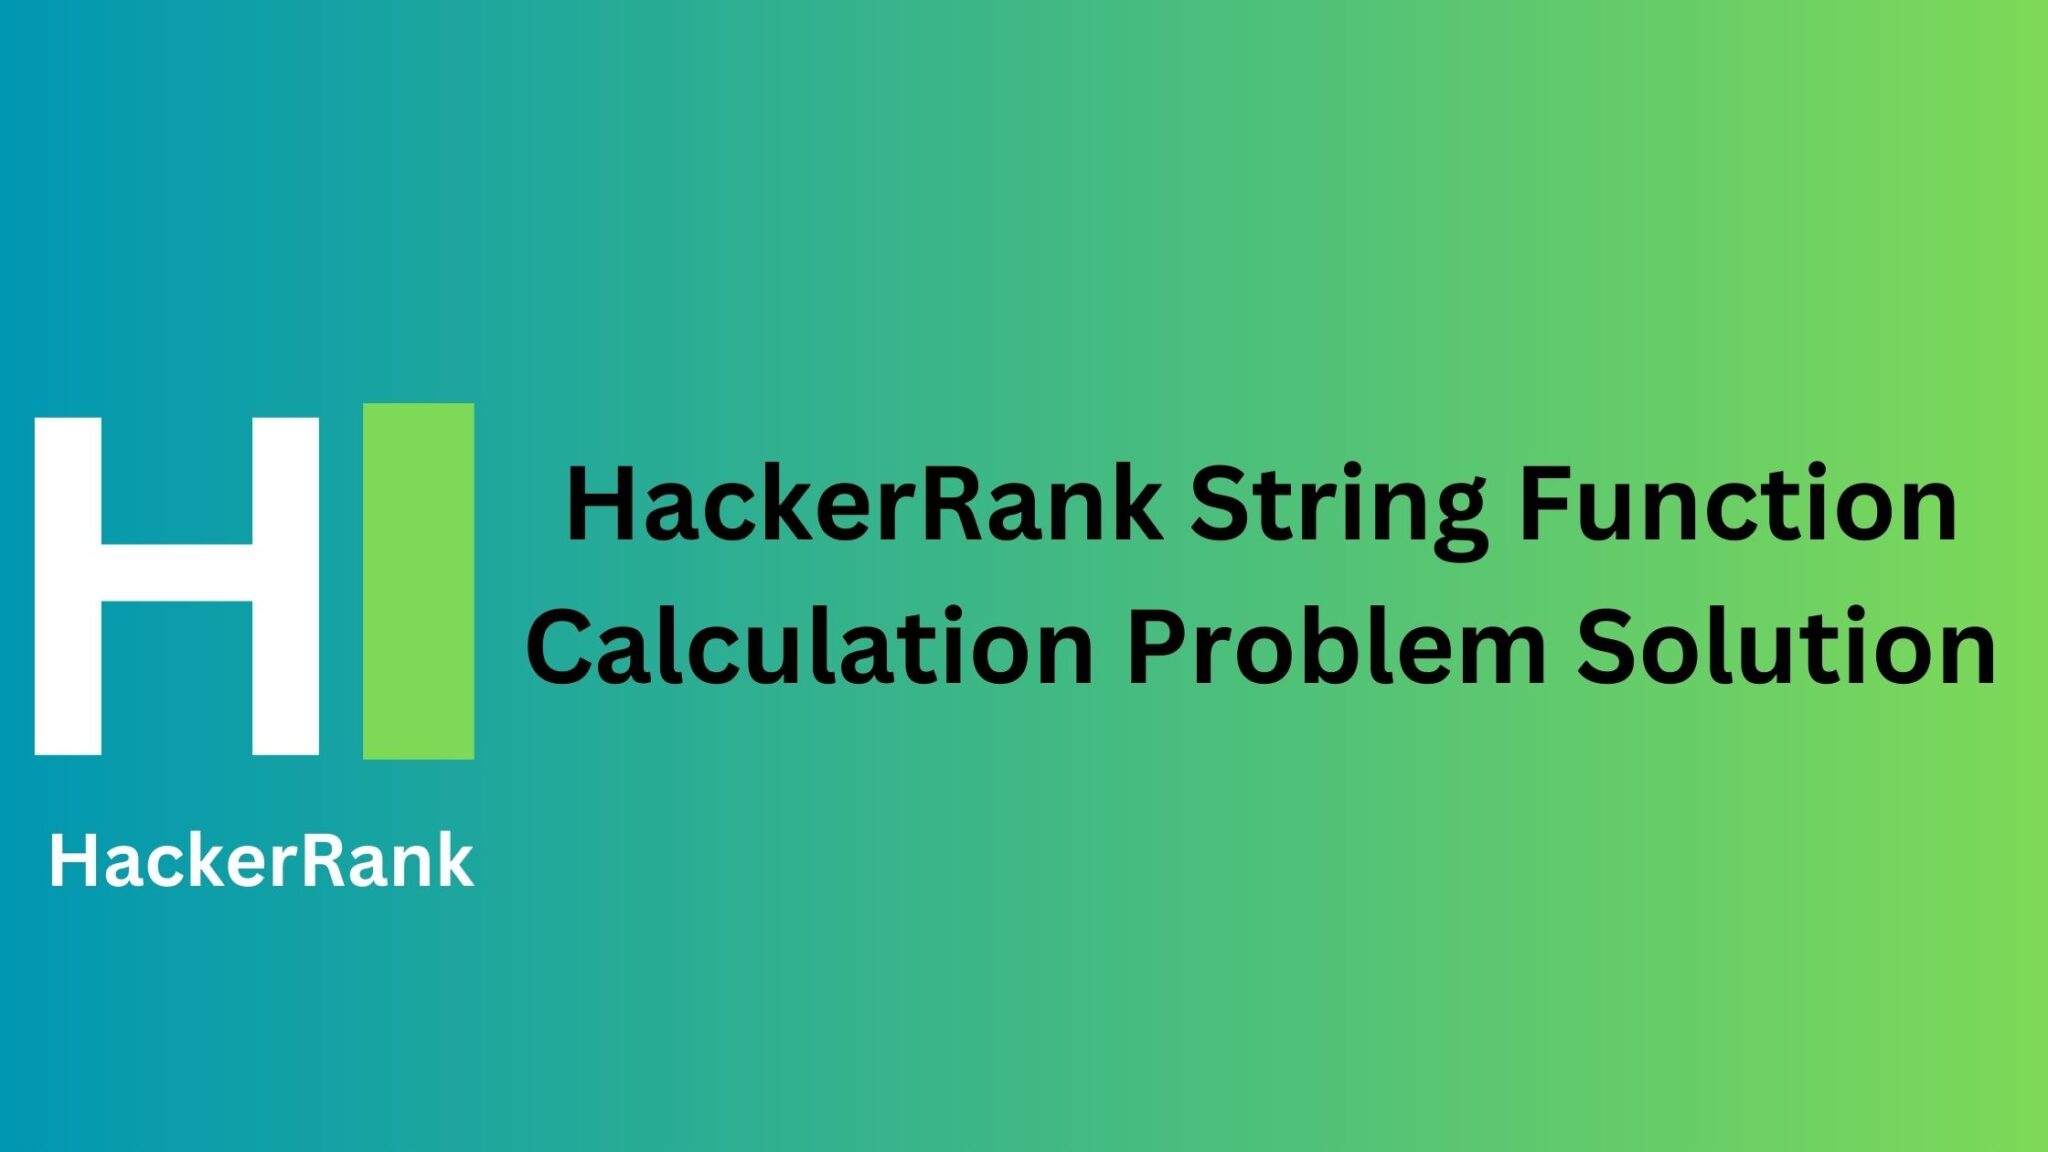 hackerrank-string-function-calculation-solution-thecscience